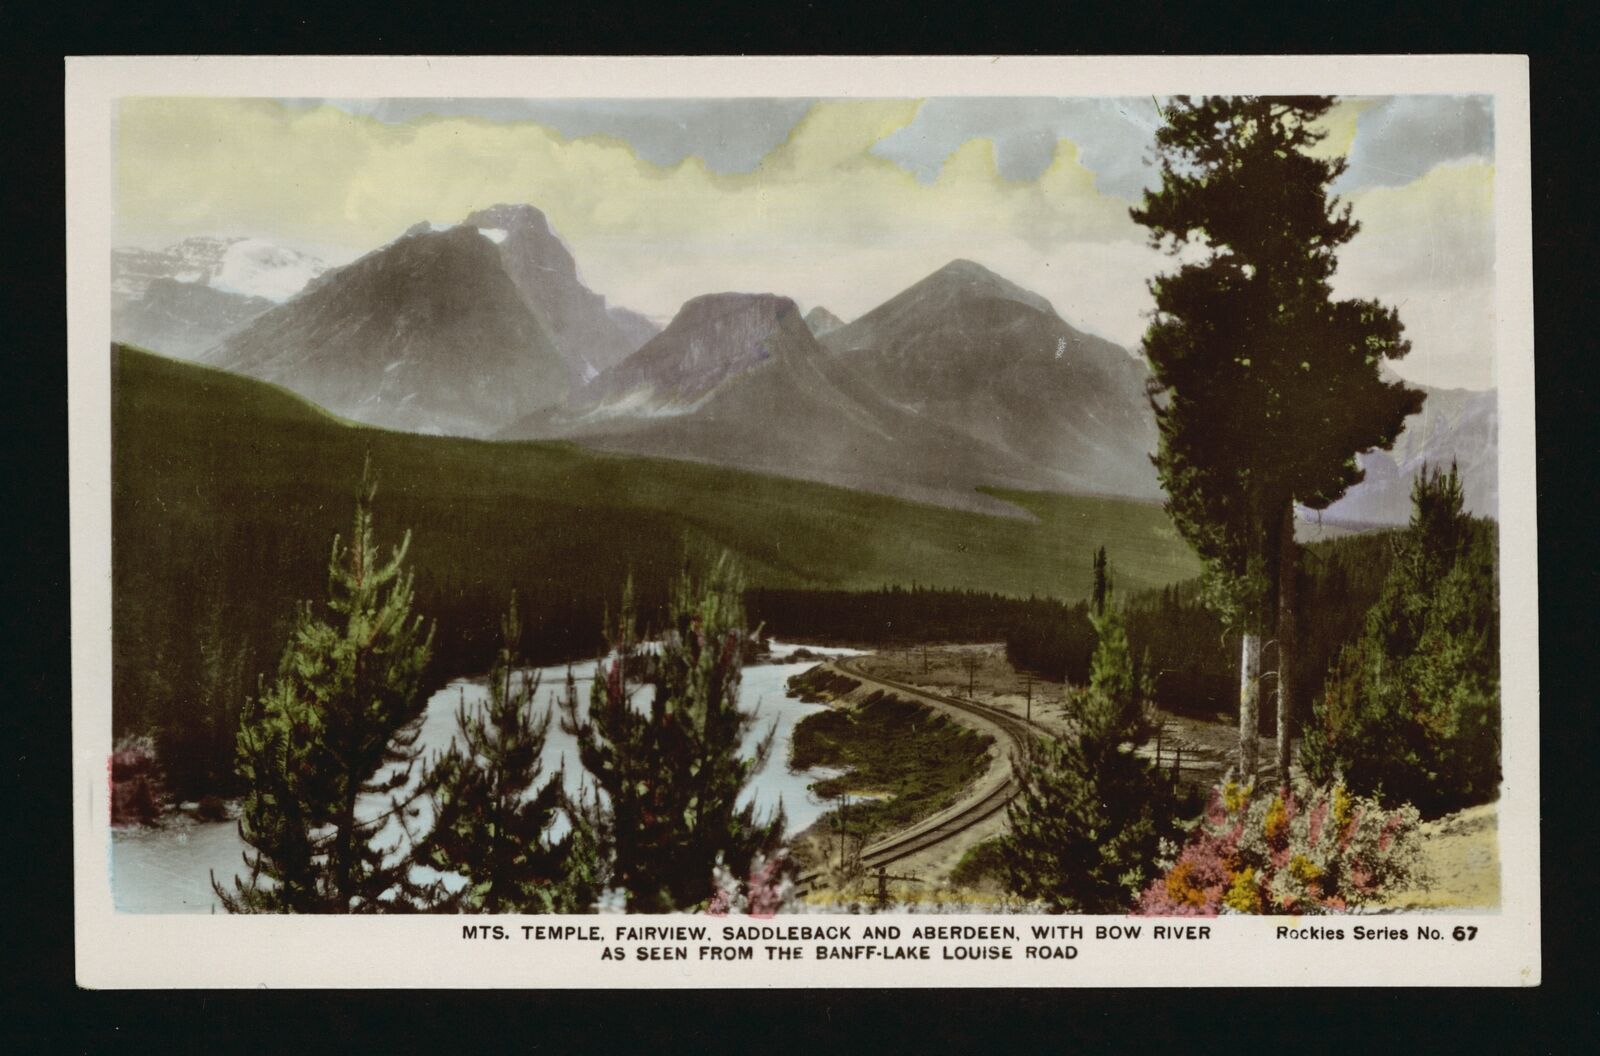 Mts Temple Fairview Saddleback and Aberdeen with Bow River as seen- Old Photo